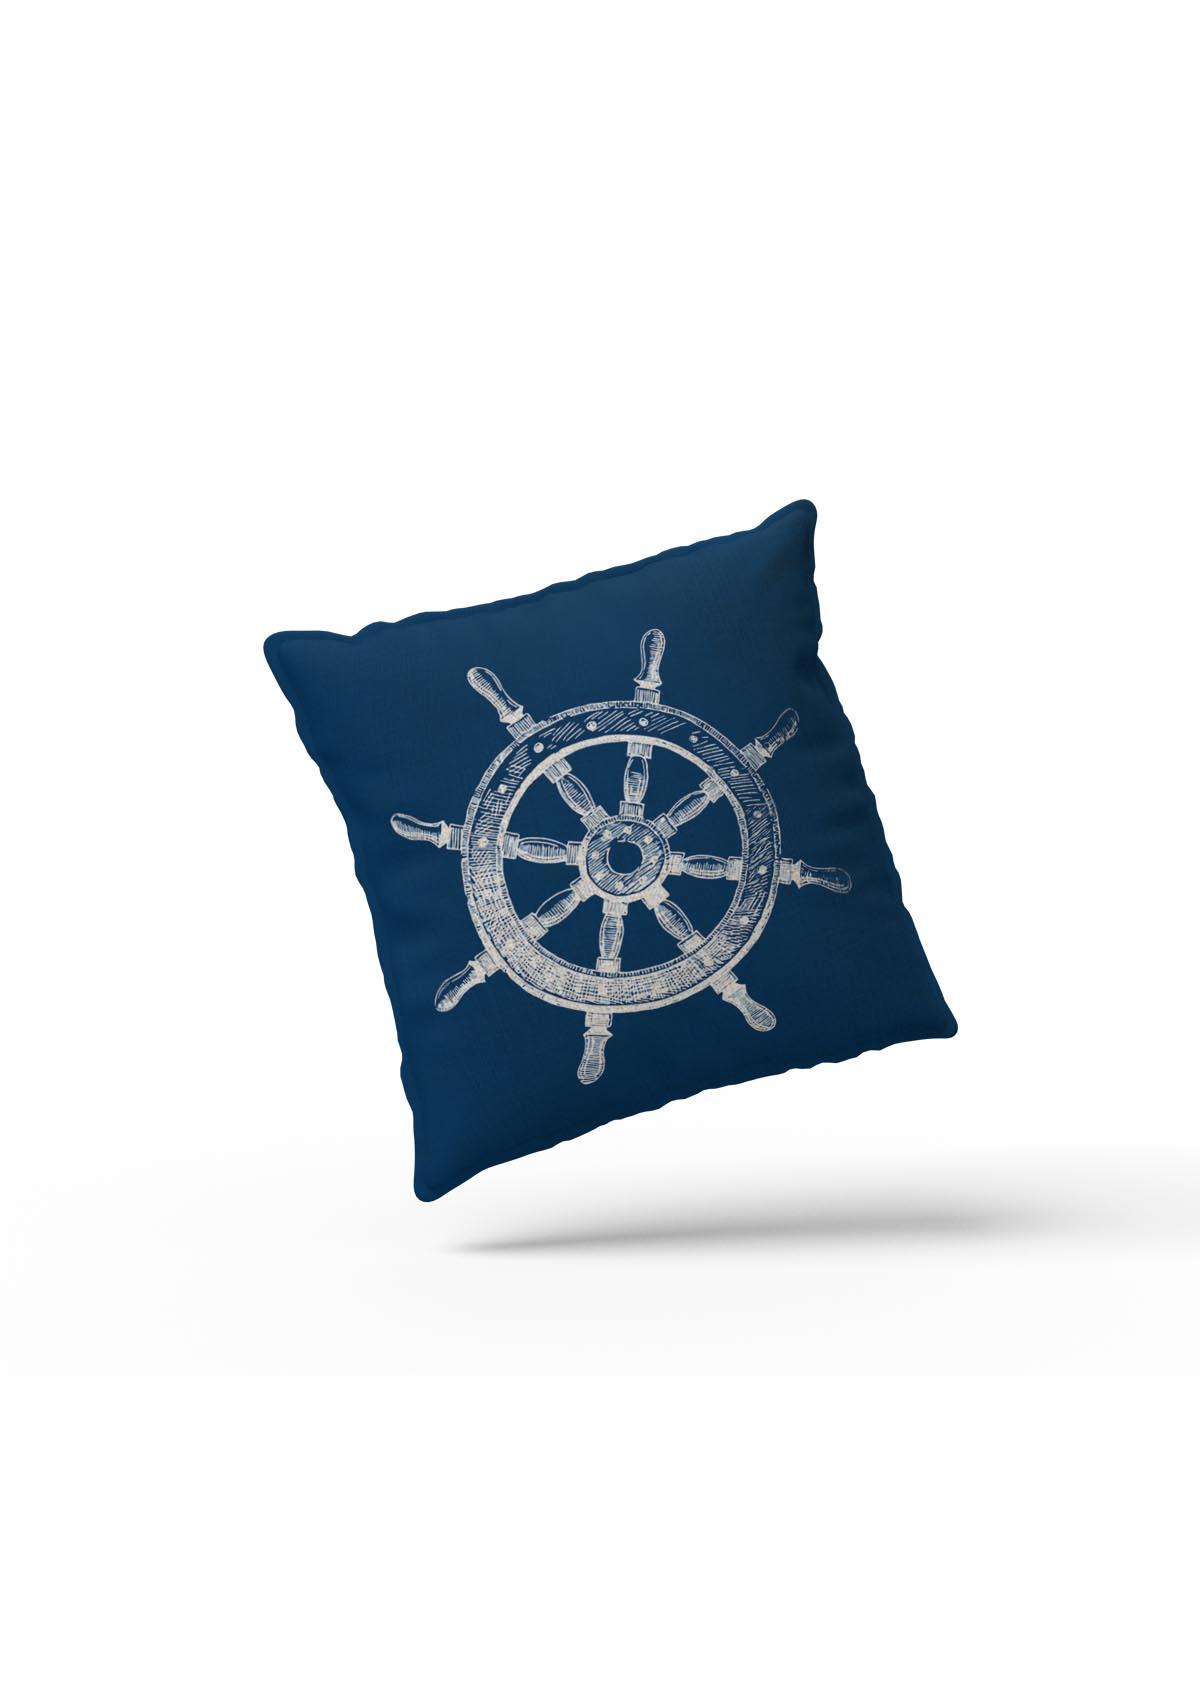 Nautical "Ocean Breeze" Cushion Covers Only